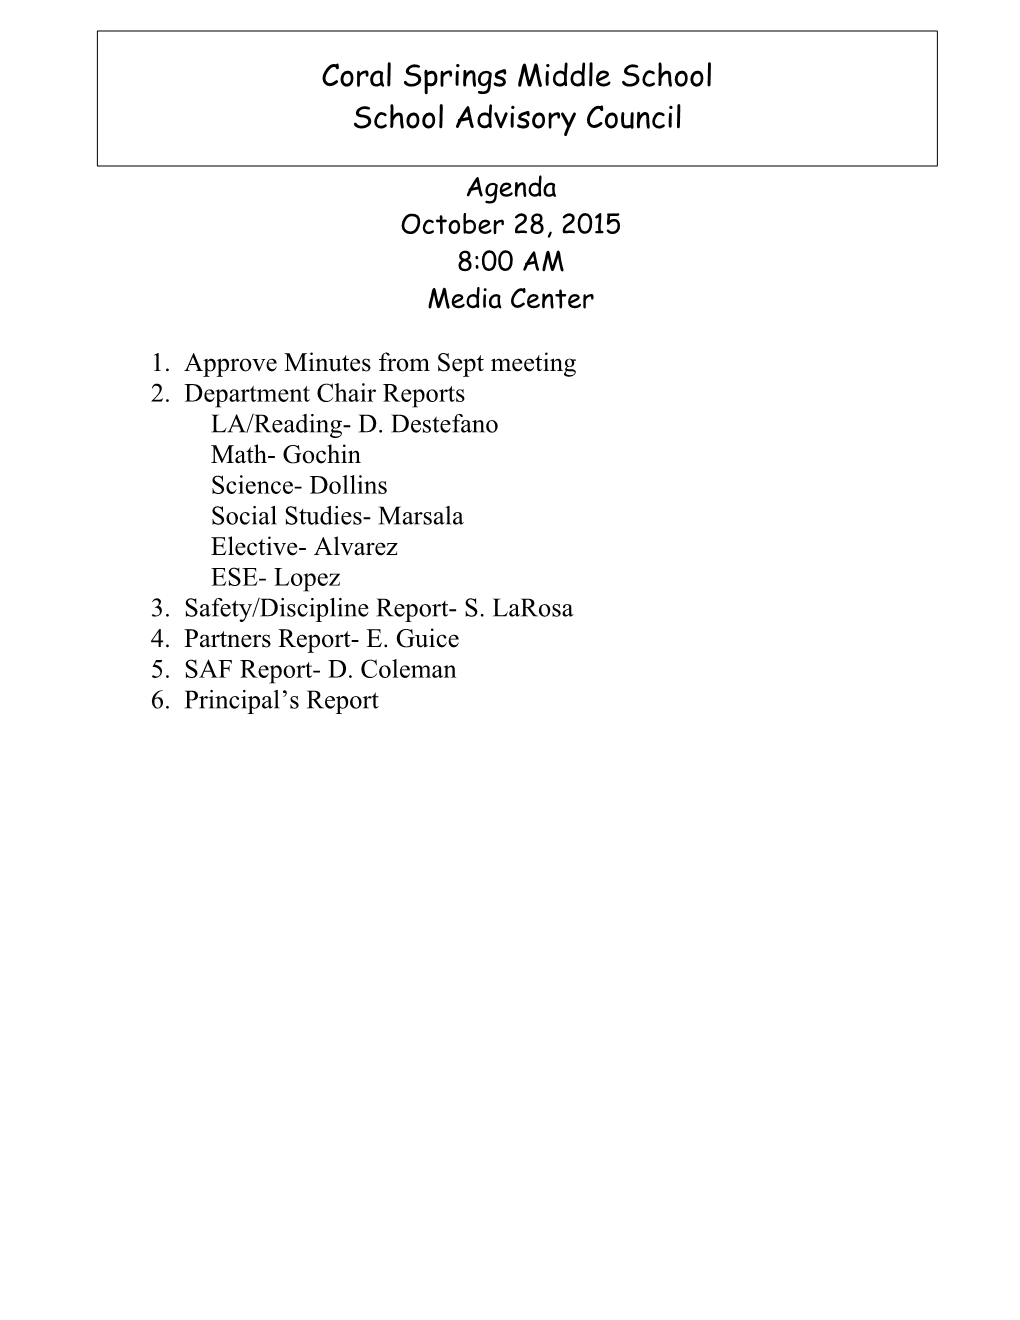 1. Approve Minutes from Sept Meeting